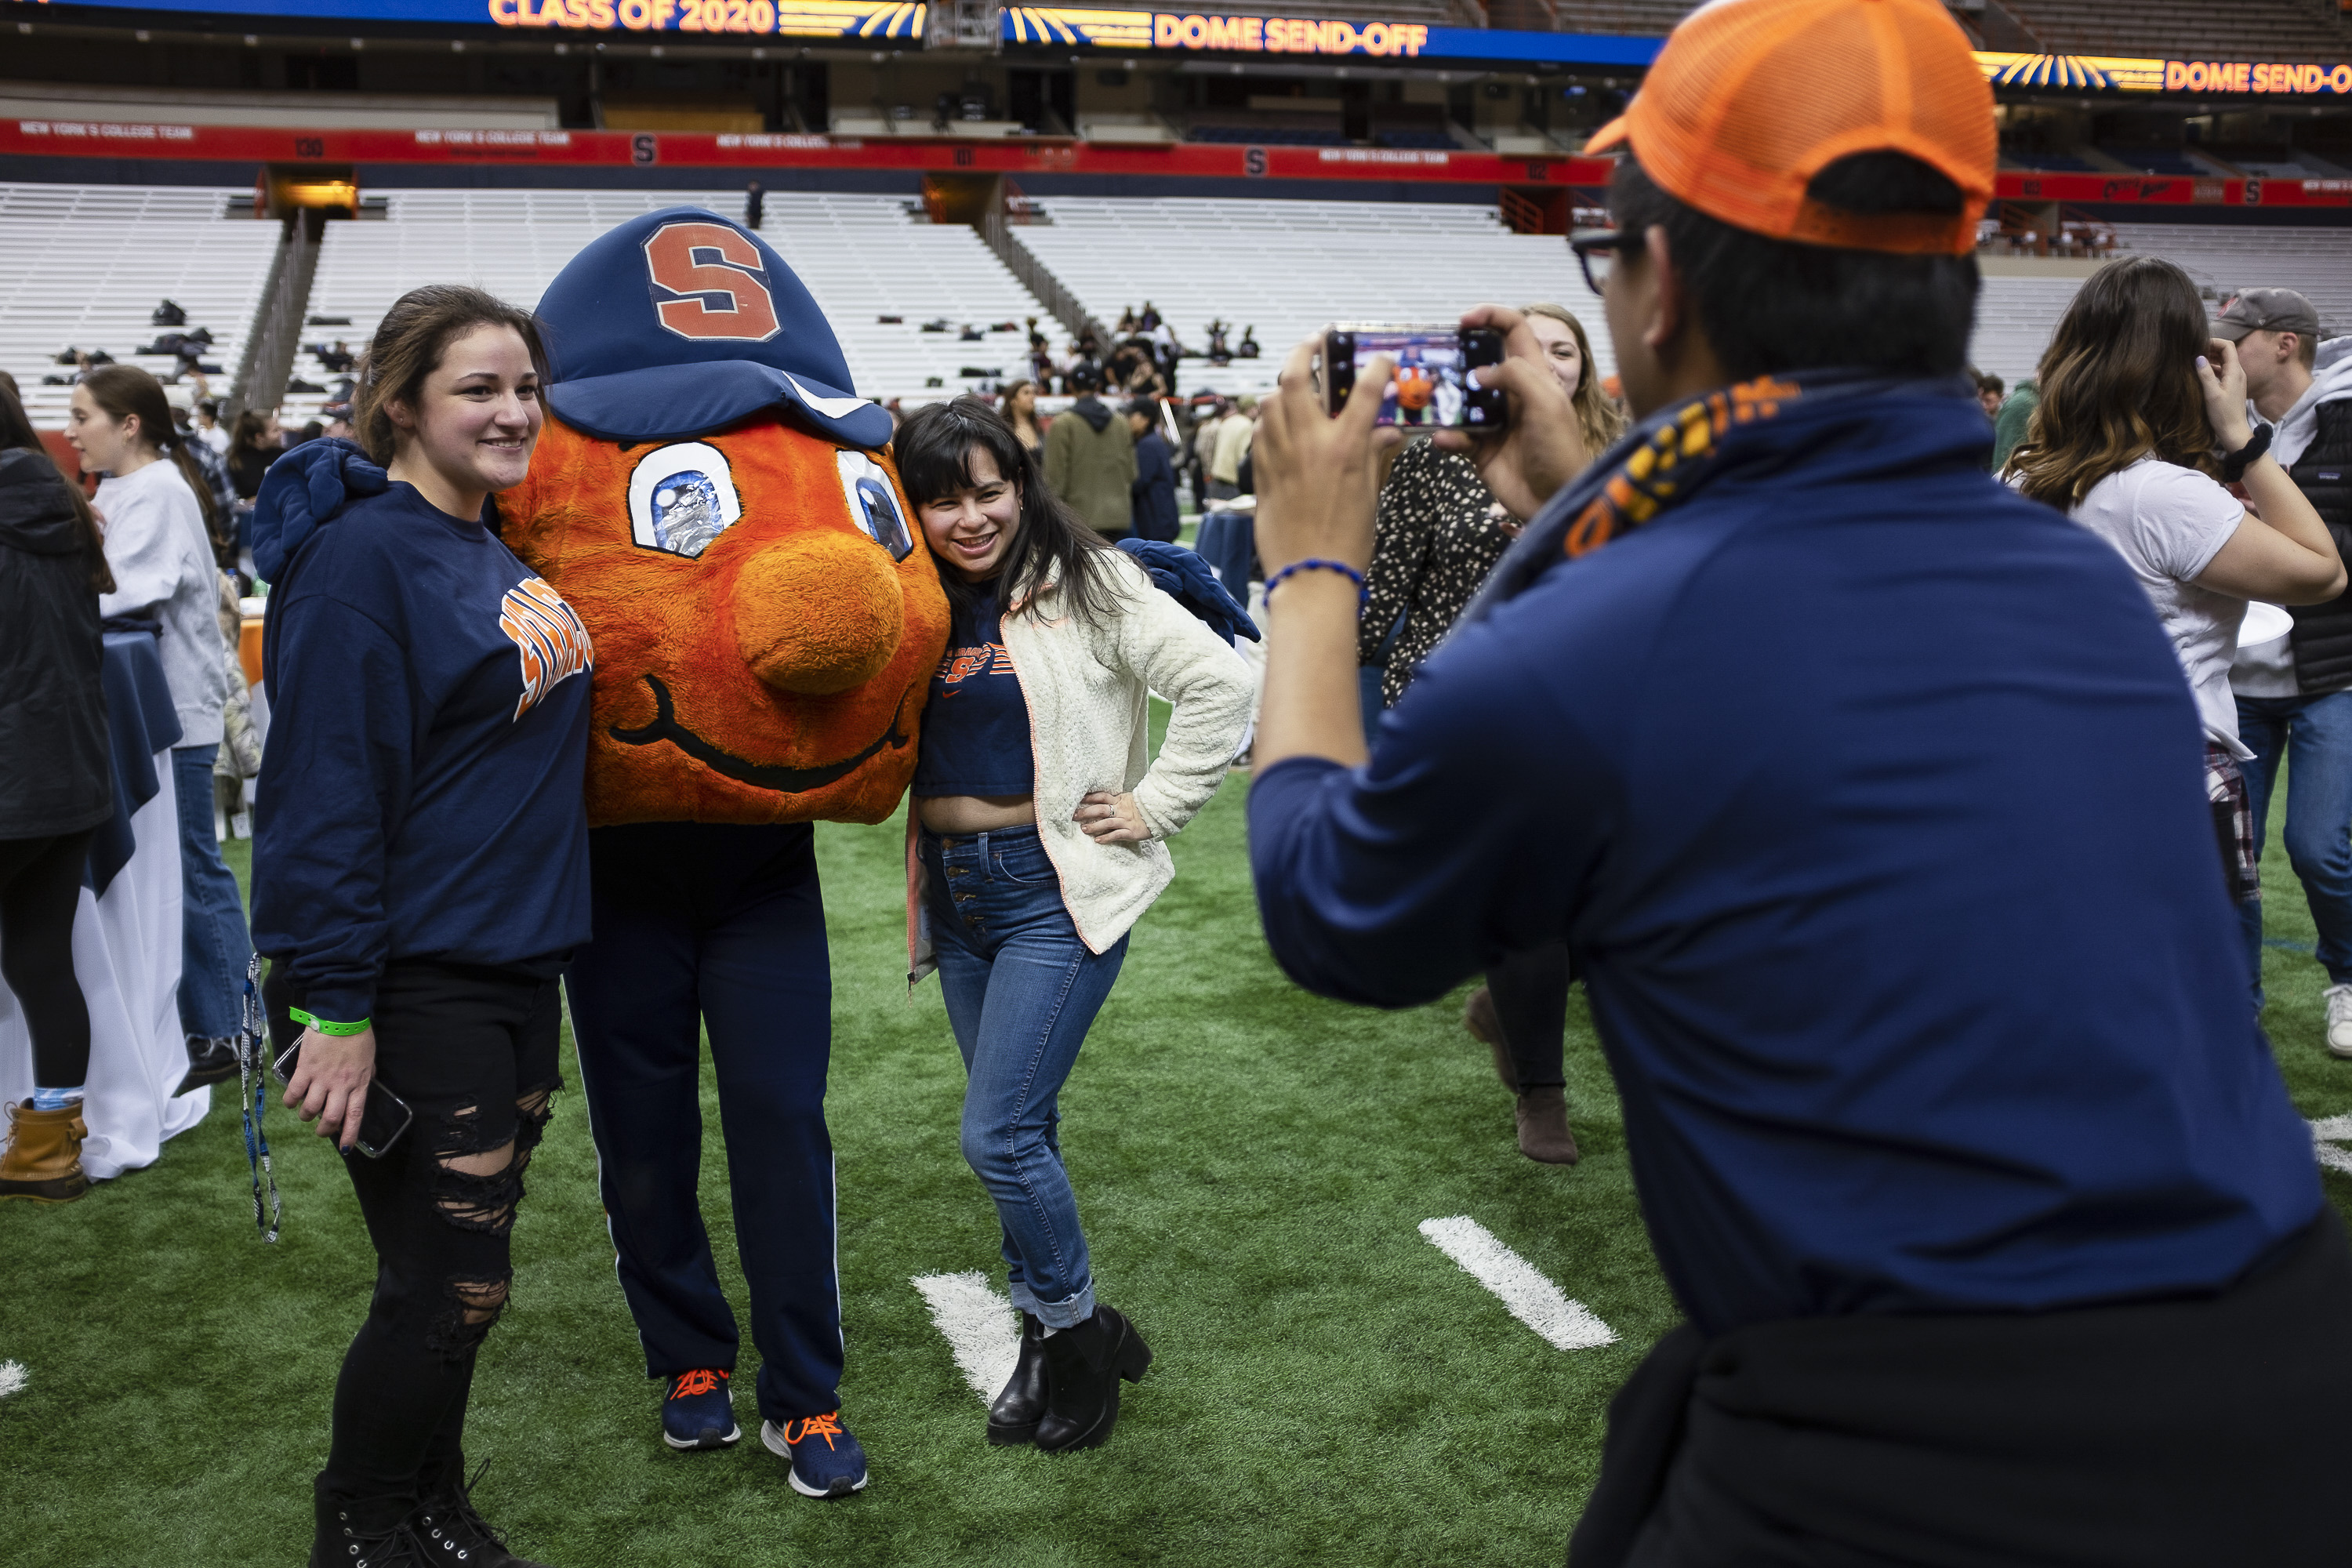 Class of 2020 says goodbye to the Carrier Dome at senior send-off